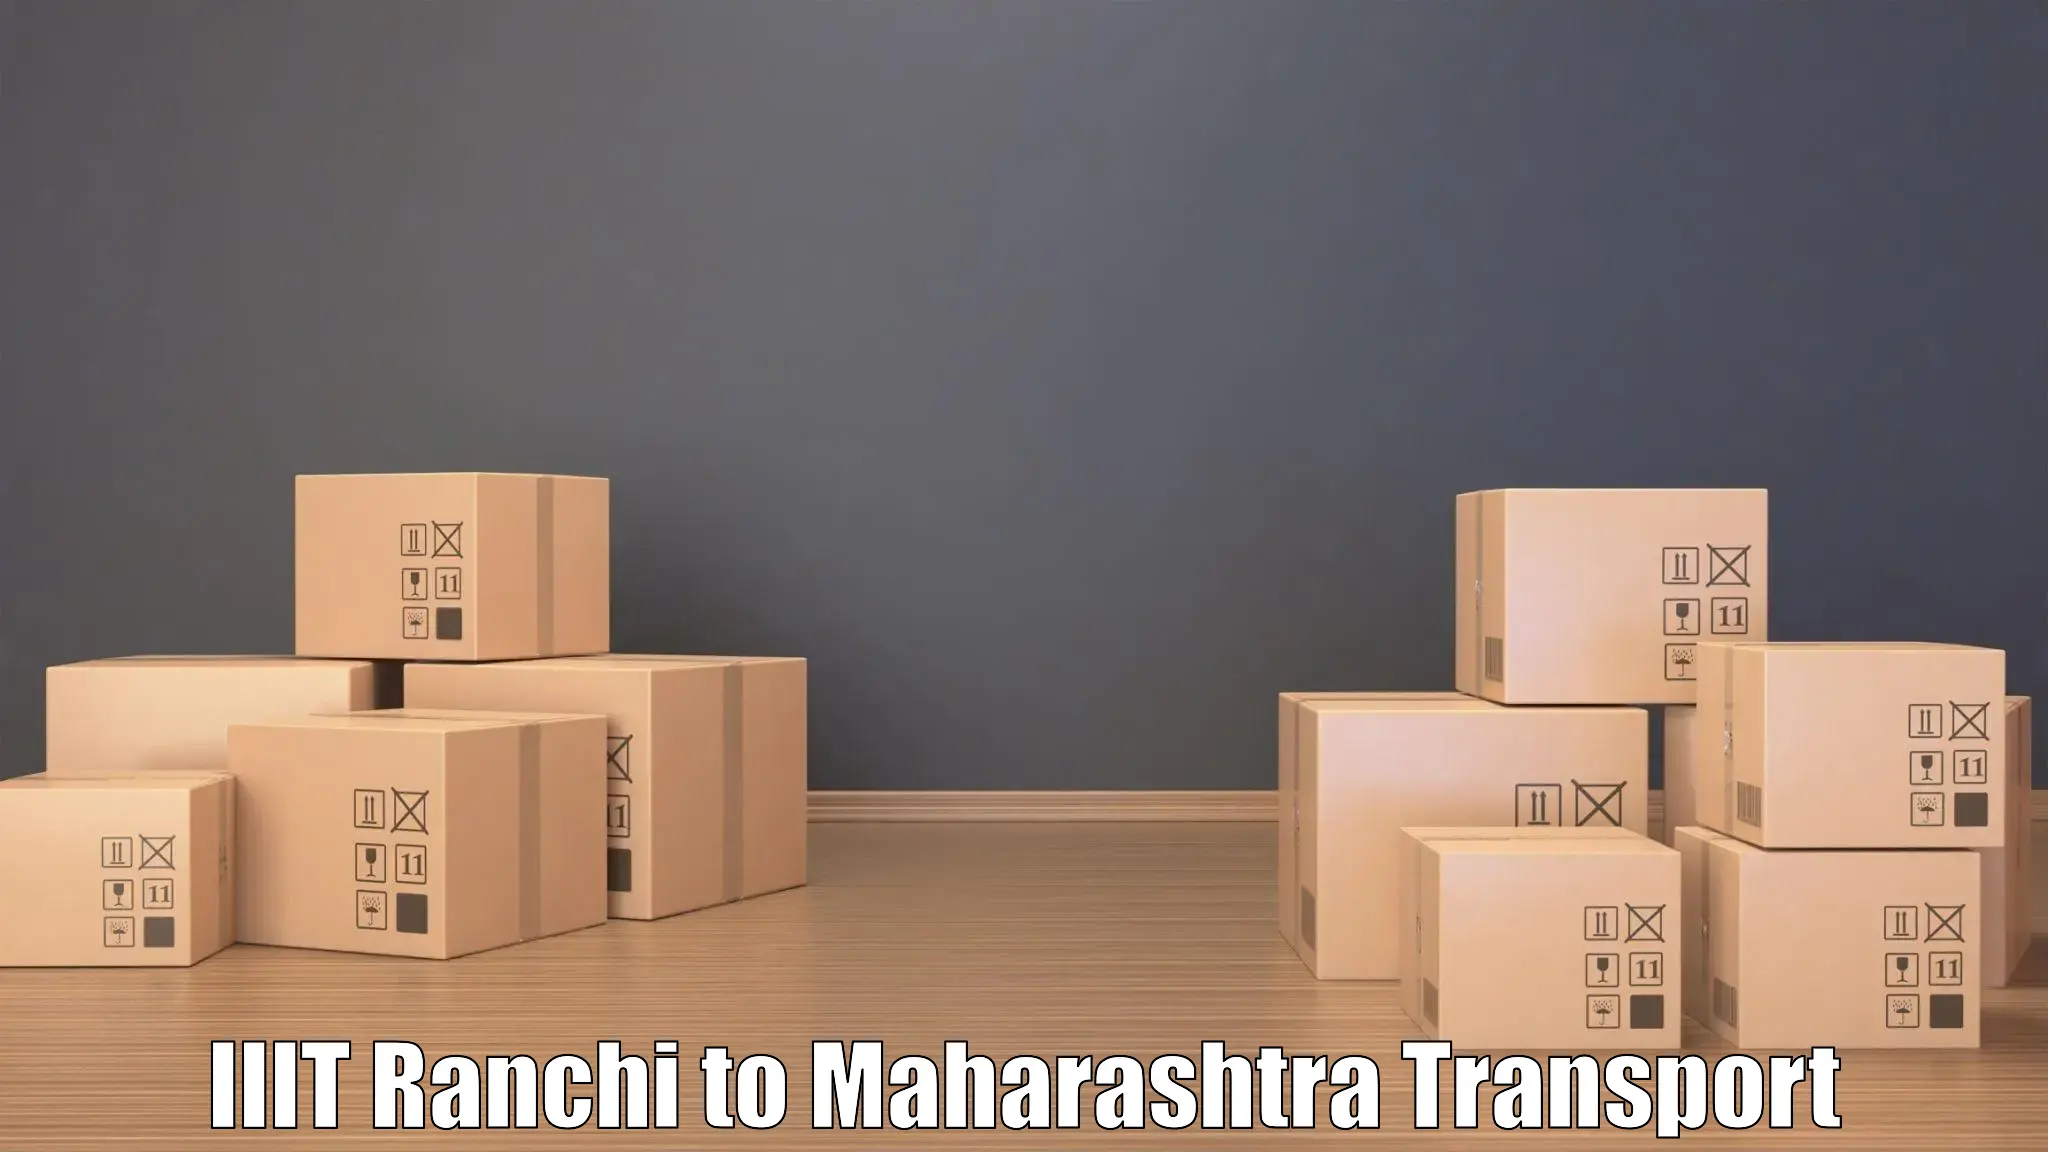 Road transport online services IIIT Ranchi to Ghatanji